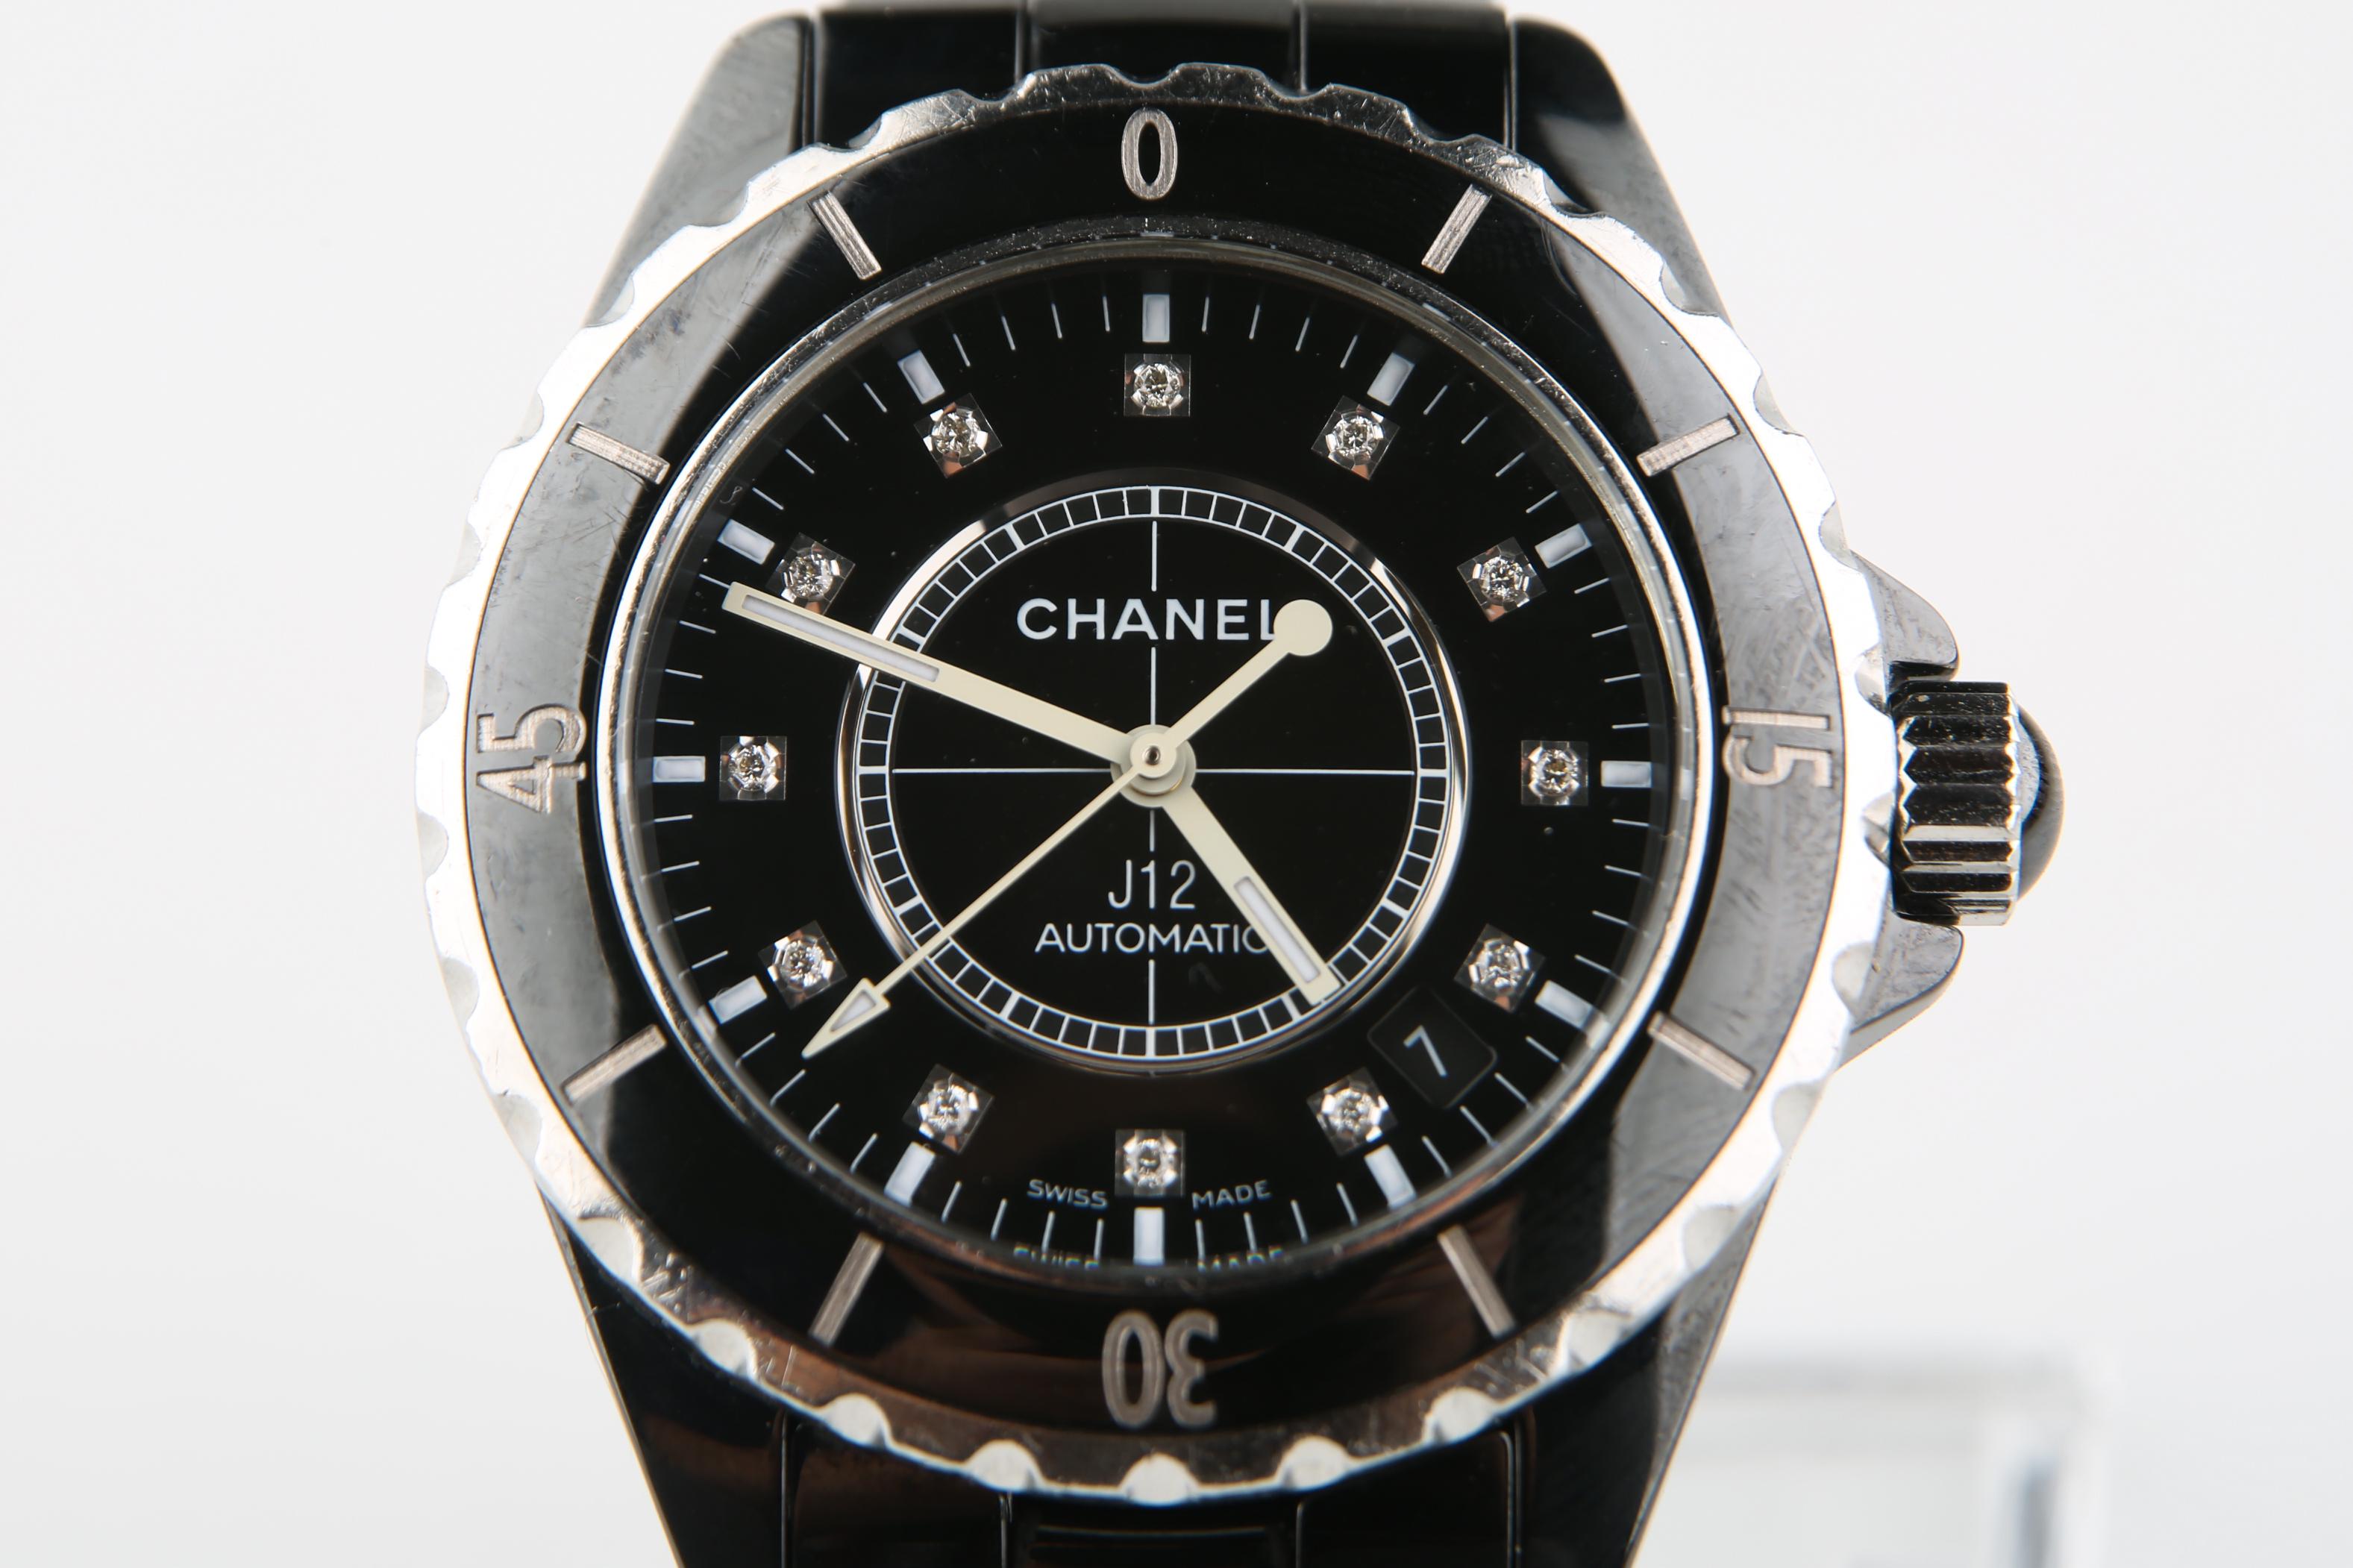 Model: J12 Classic Automatic
Model number: H0685
Serial number: LN85848
Black Chanel Stainless Steel Case w/ Diver's Bezel
Unidirectional Black Enamel Diver's Bezel
Chanel Automatic Self-Winding Mechanical Movement
38 mm in Diameter (42 mm w/